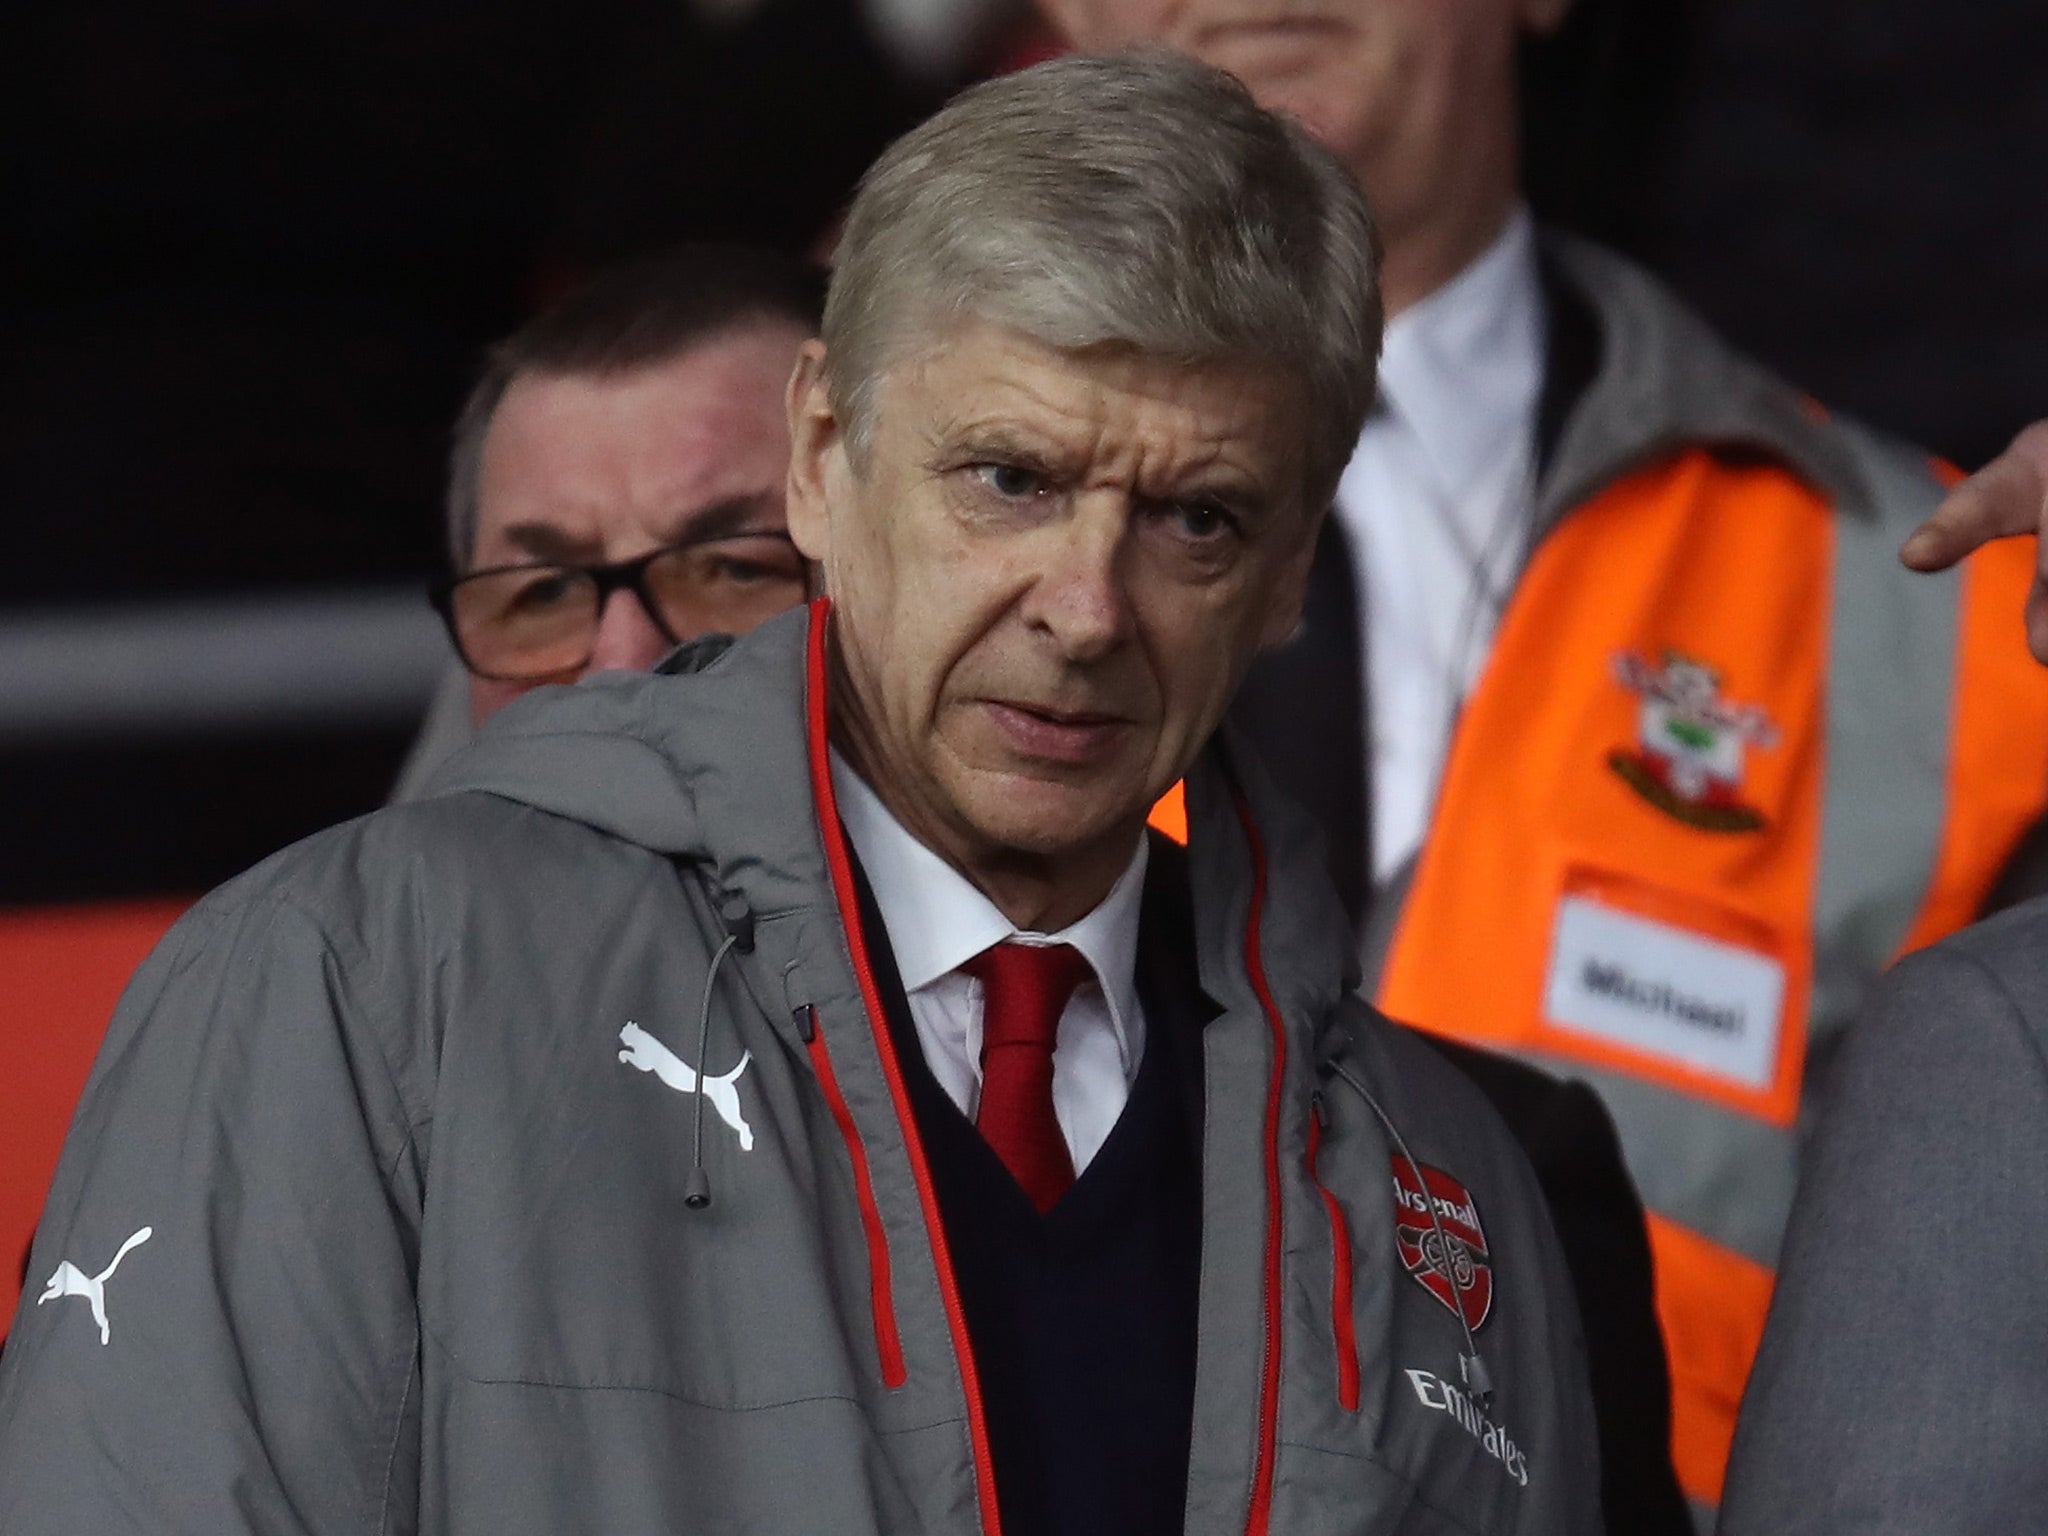 Arsene Wenger will not be able to sit in Stamford Bridge's director's box